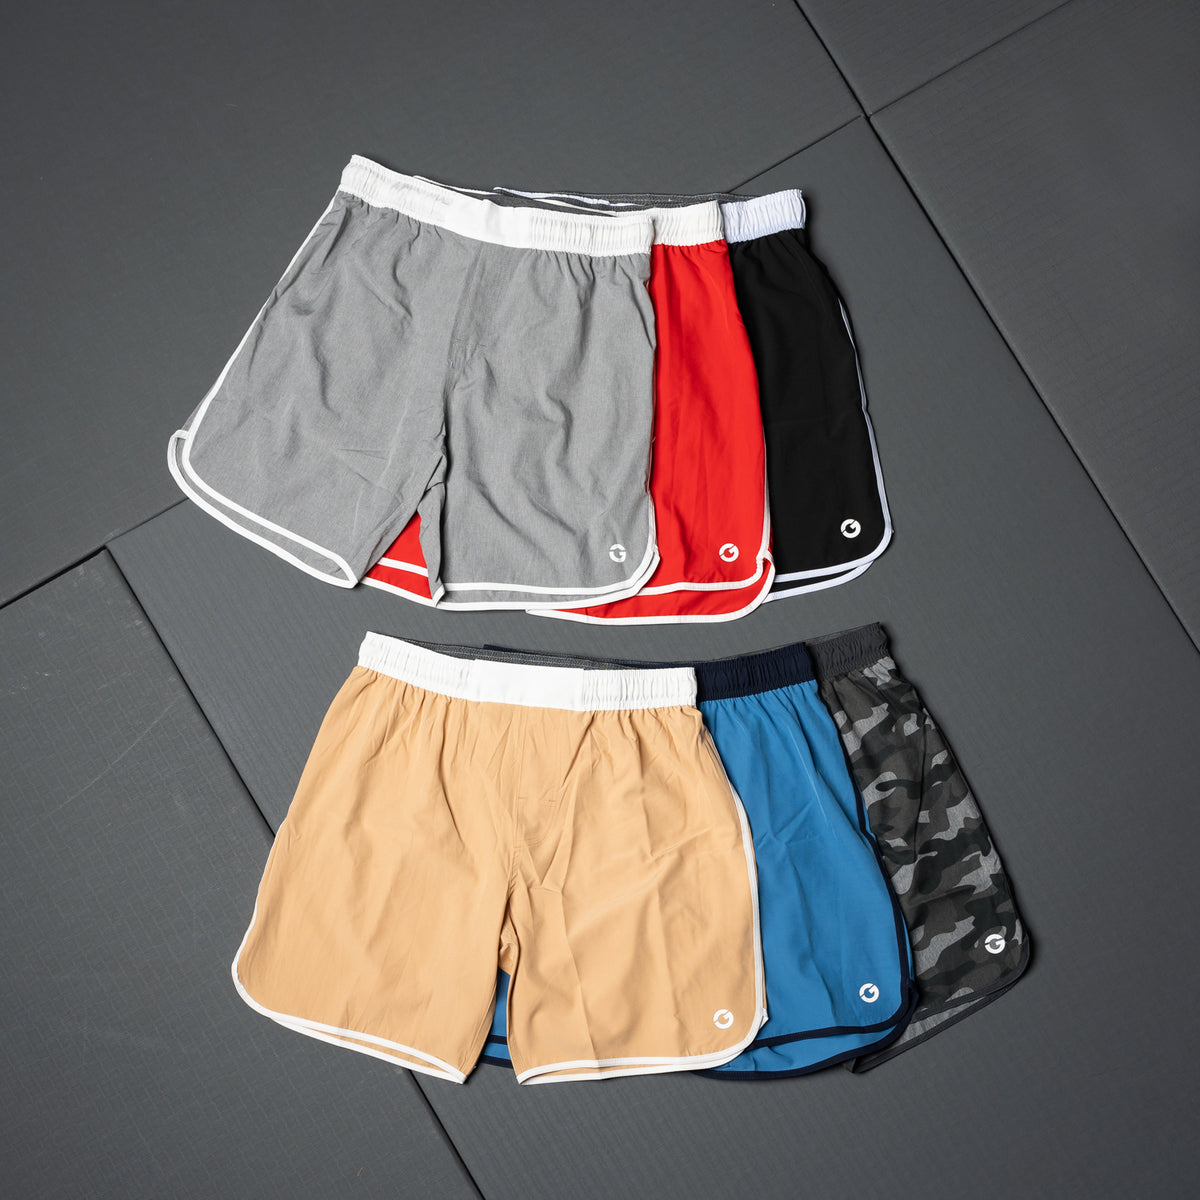 3 Pacific Shorts Bundle (Size Small)